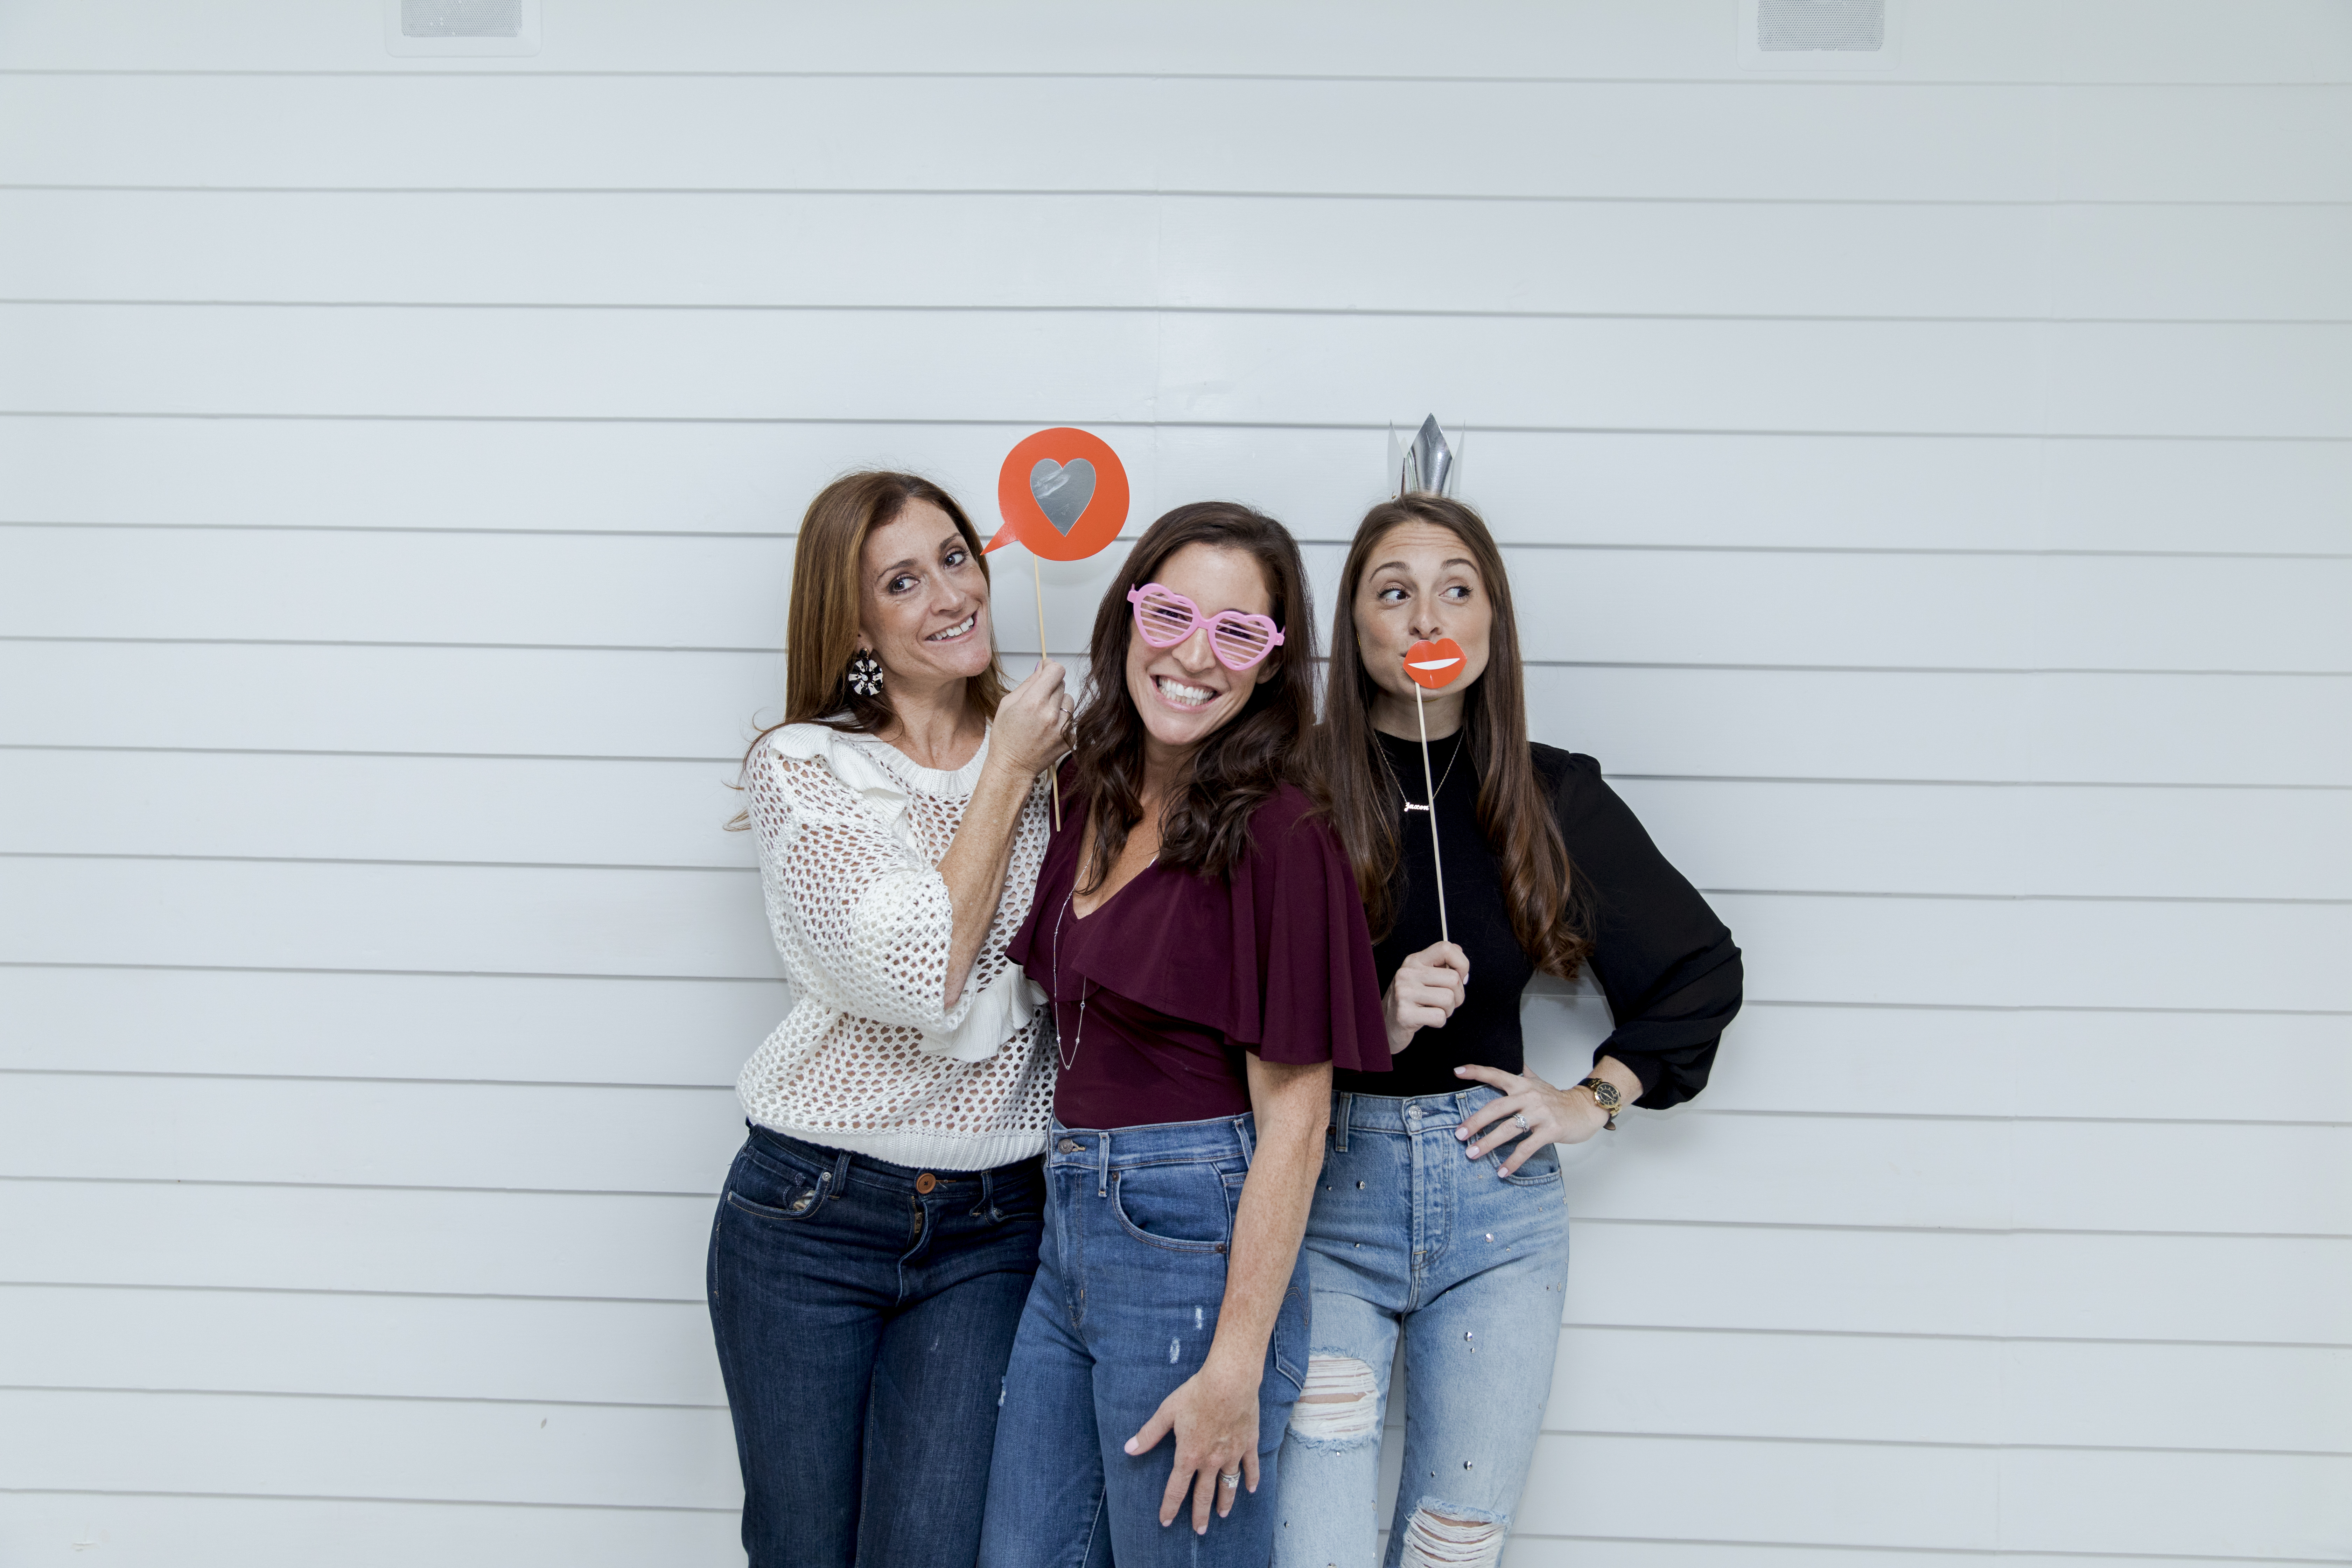 The girls of Forever Freckled talk about why it is so hard as mom to take "Me Time" and give quick ways to promote self health.